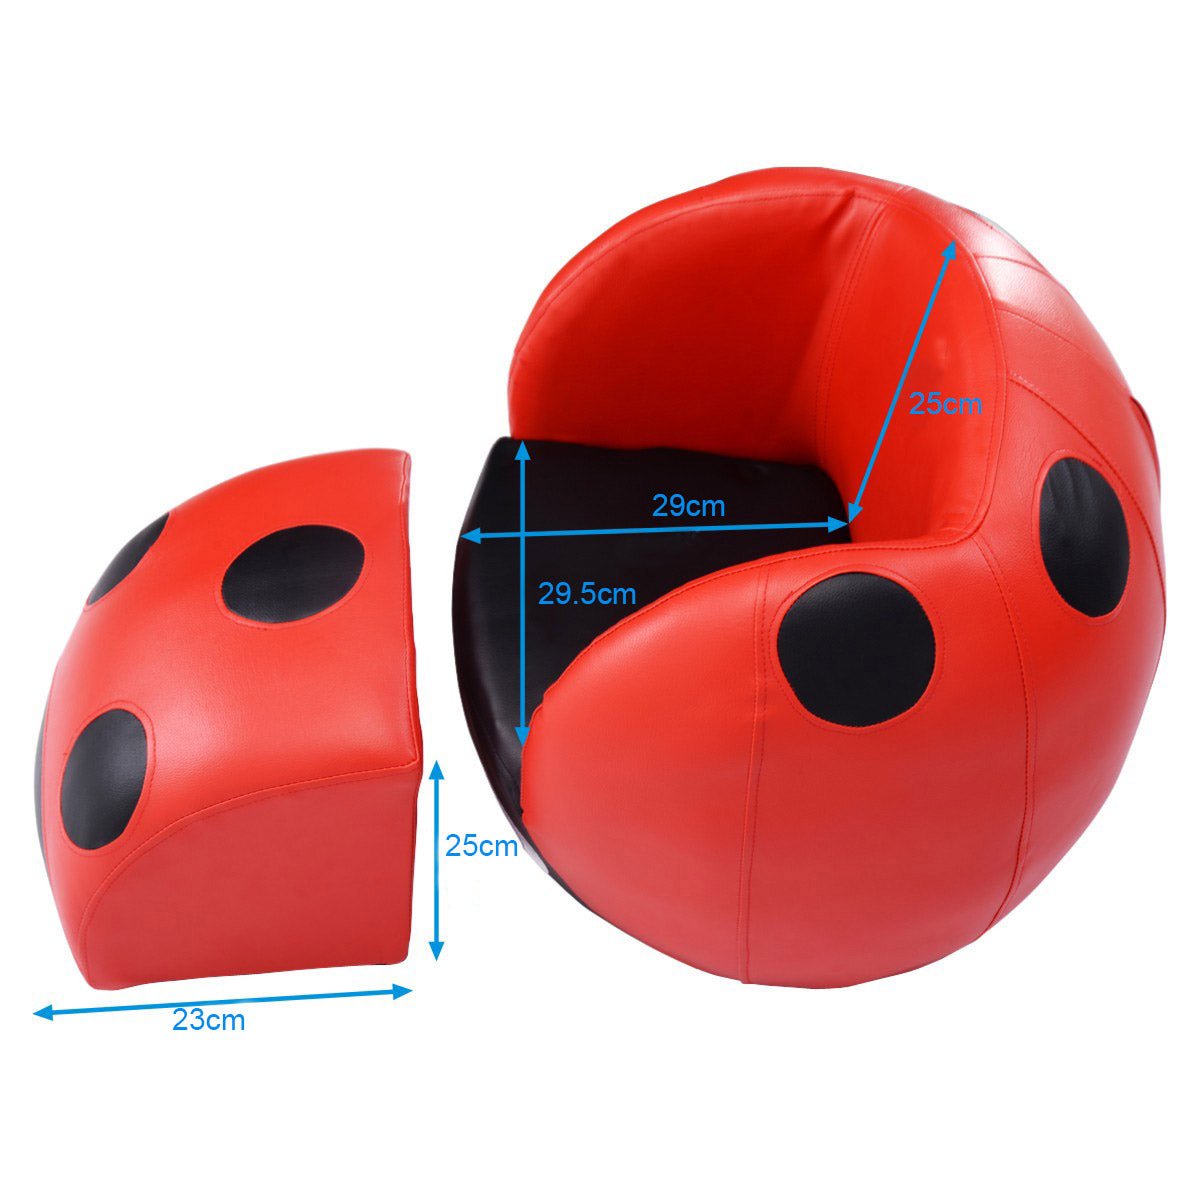 Children's Leisure Armchair: Ladybug Shaped Chair with Waterproof PVC Fabric